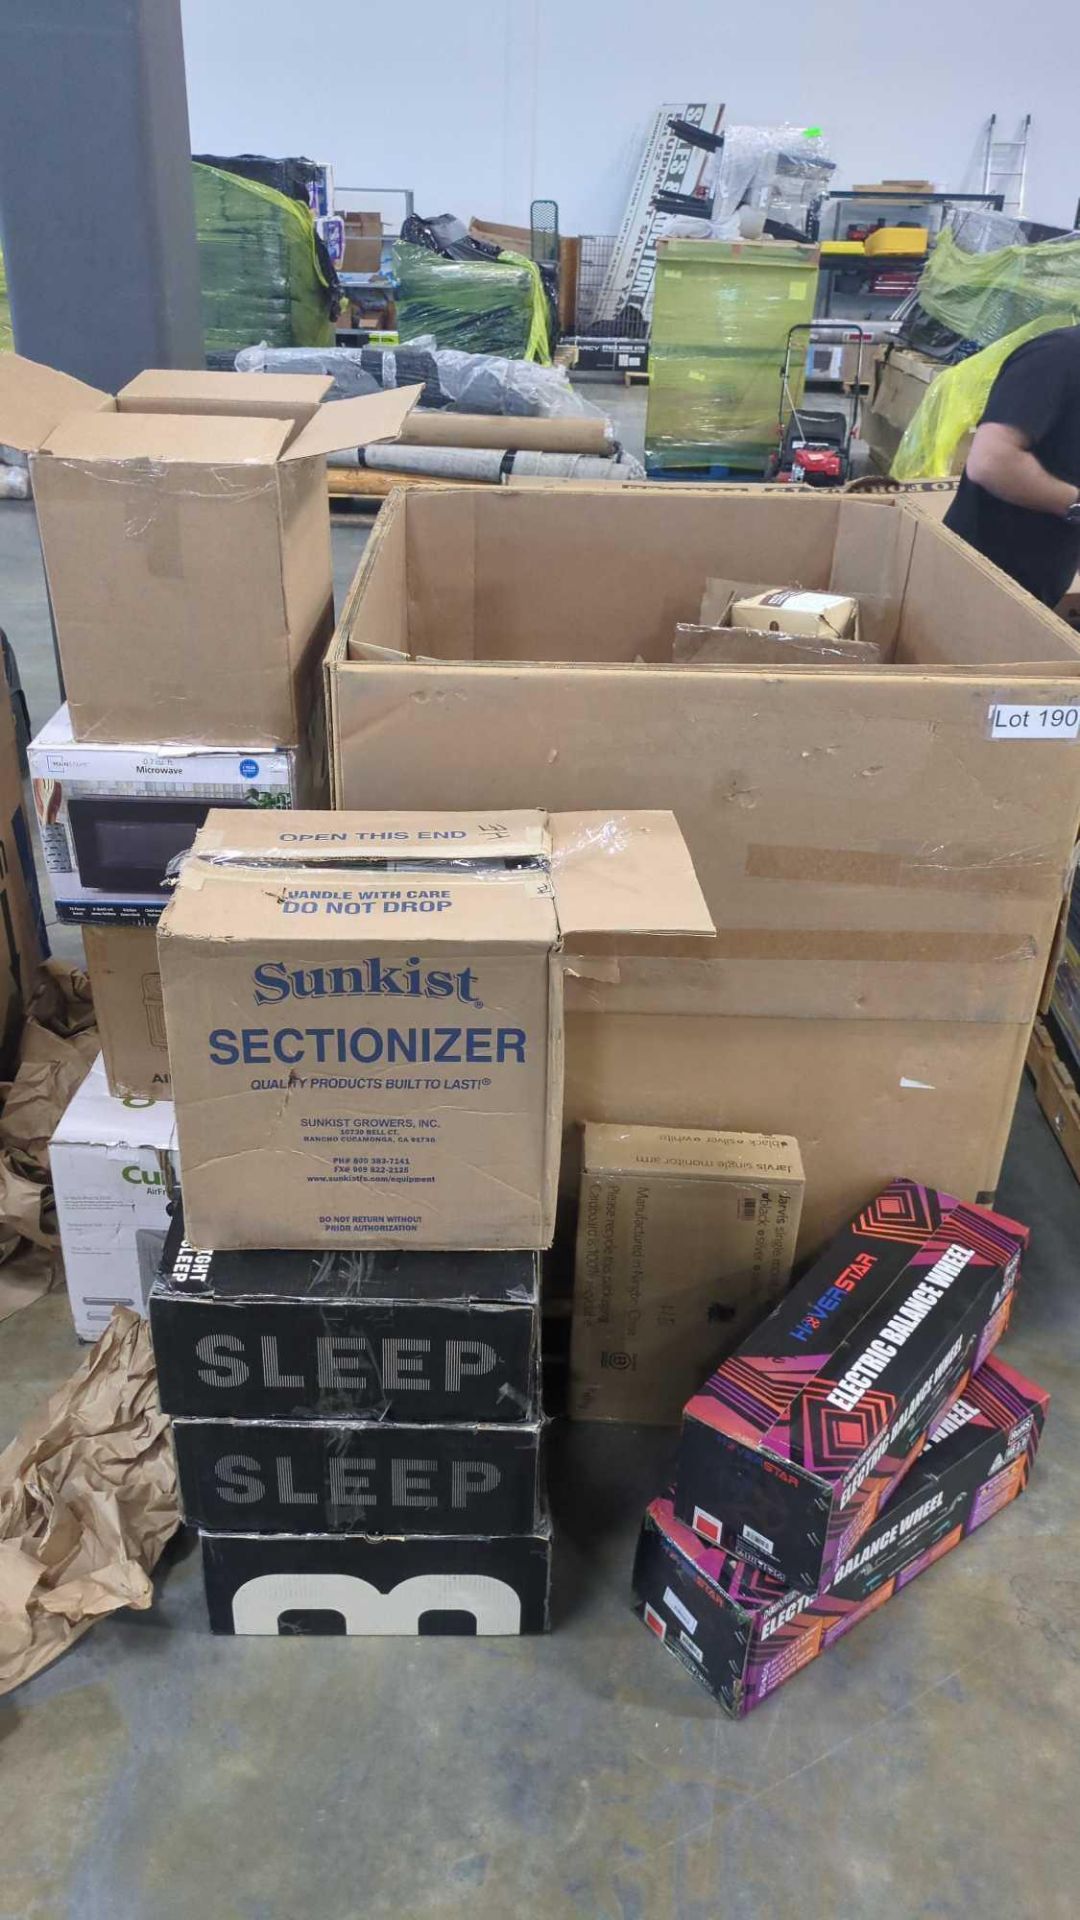 Sleep 8 boxes, Electric Balance Wheels, Cuisinart airfryer toaster, Microwave, sunkist sectionizer,